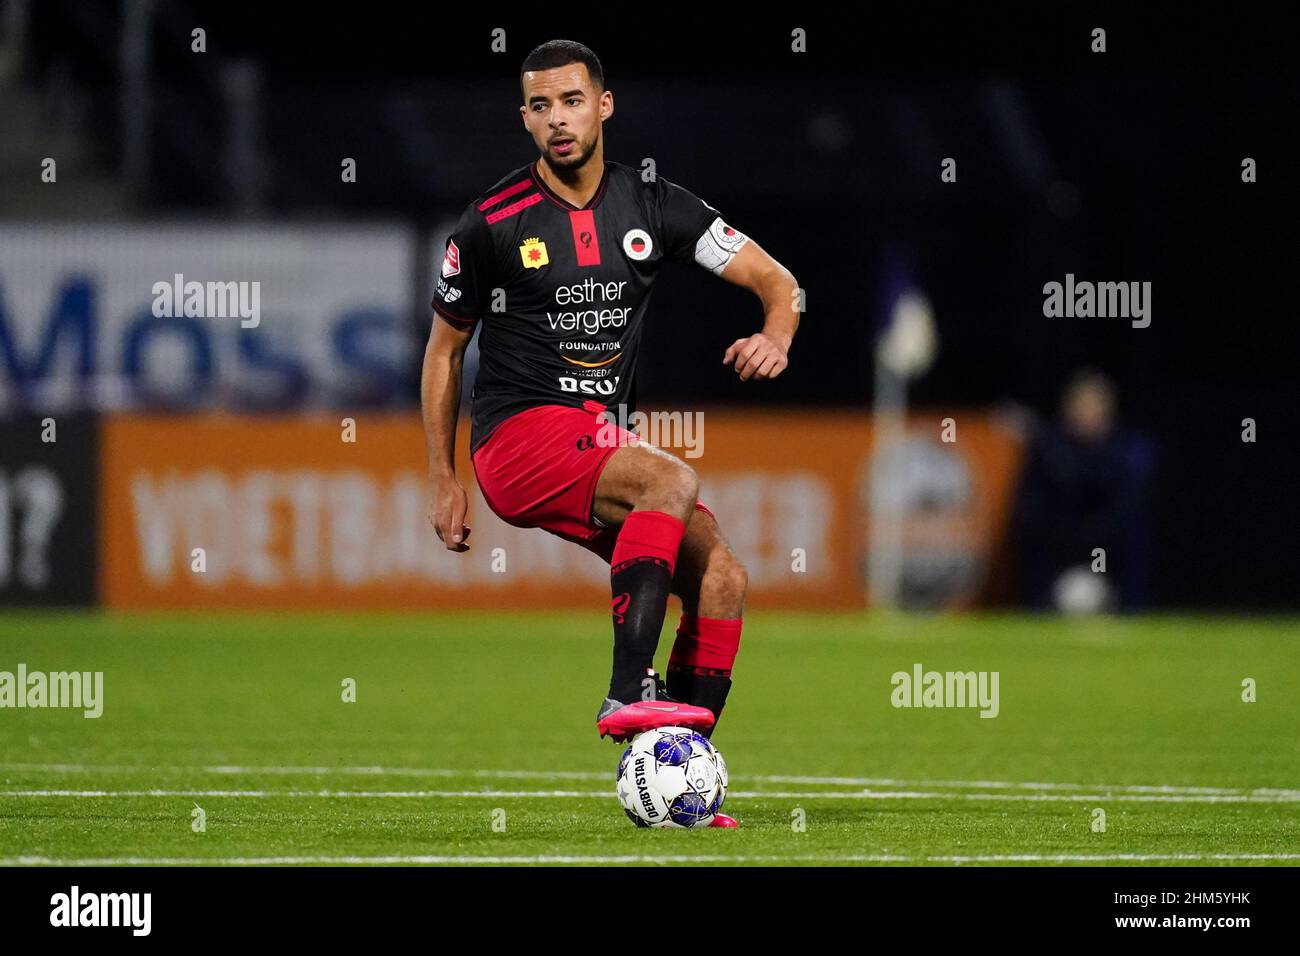 EINDHOVEN, NETHERLANDS - FEBRUARY 7: Redouan El Yaakoubi of Excelsior  Rotterdam during the Dutch Keukenkampioendivisie match between FC Eindhoven  and Excelsior at the Jan Louwers Stadion on February 7, 2022 in Eindhoven,